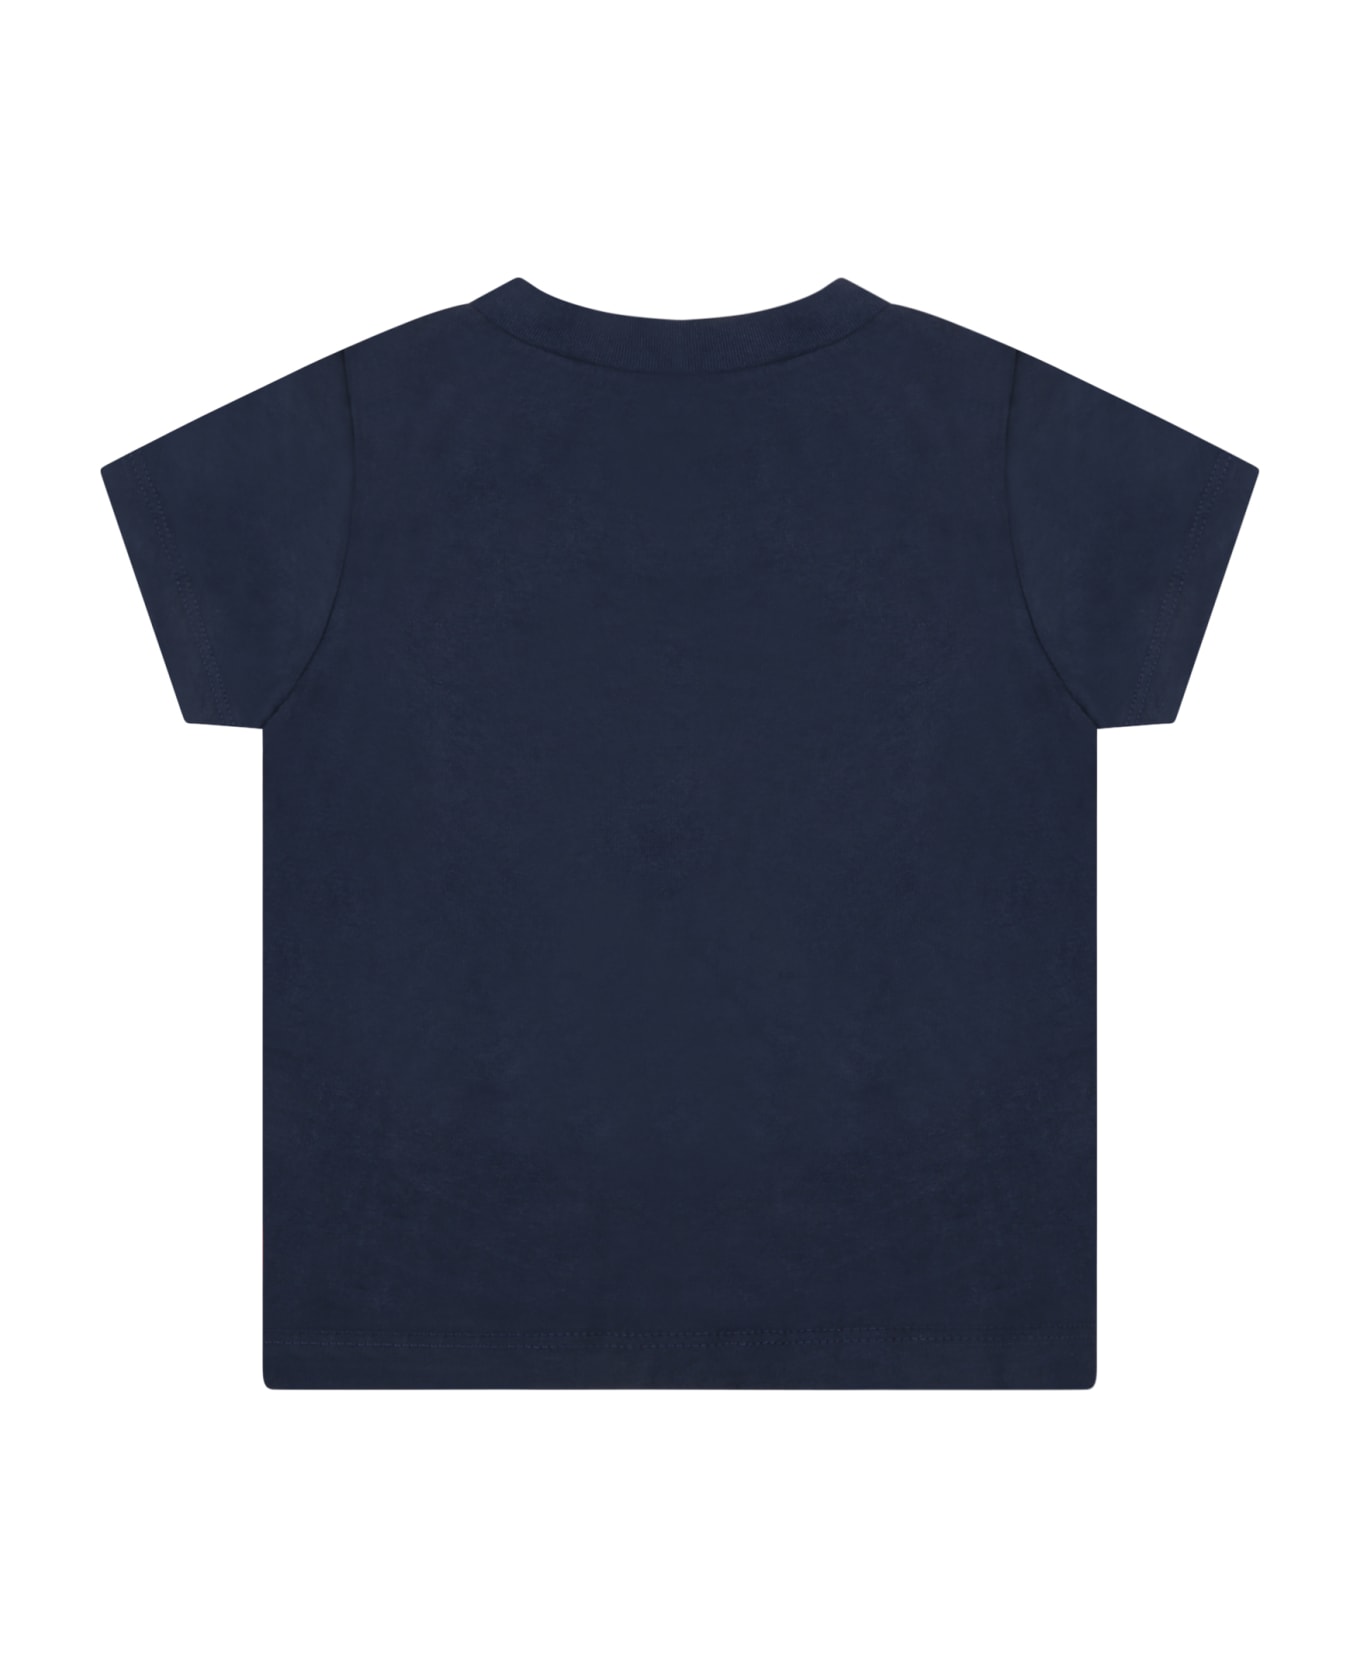 Levi's Blue T-shirt For Babies With Patch Logo - Blu